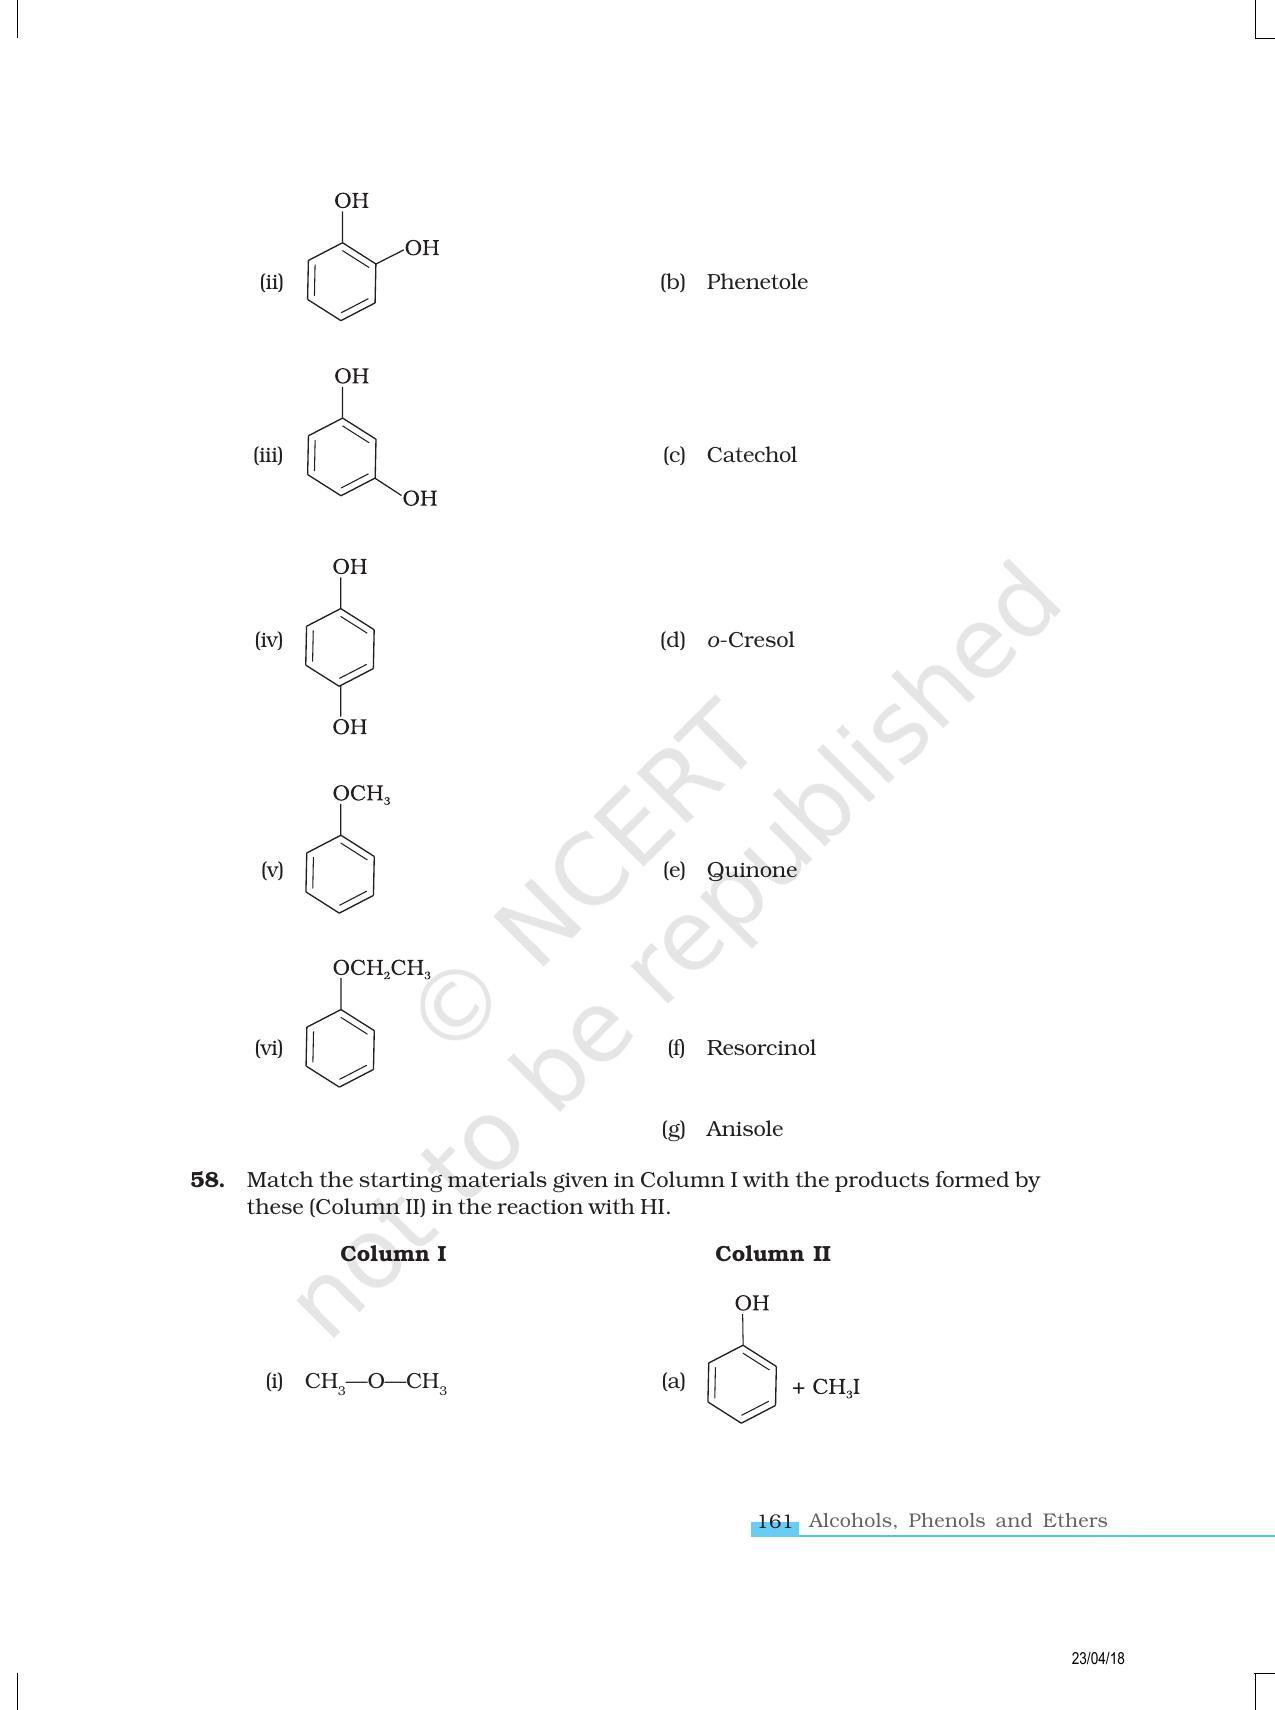 NCERT Exemplar Book for Class 12 Chemistry: Chapter 11 Alcohols, Phenols and Ethers - Page 8